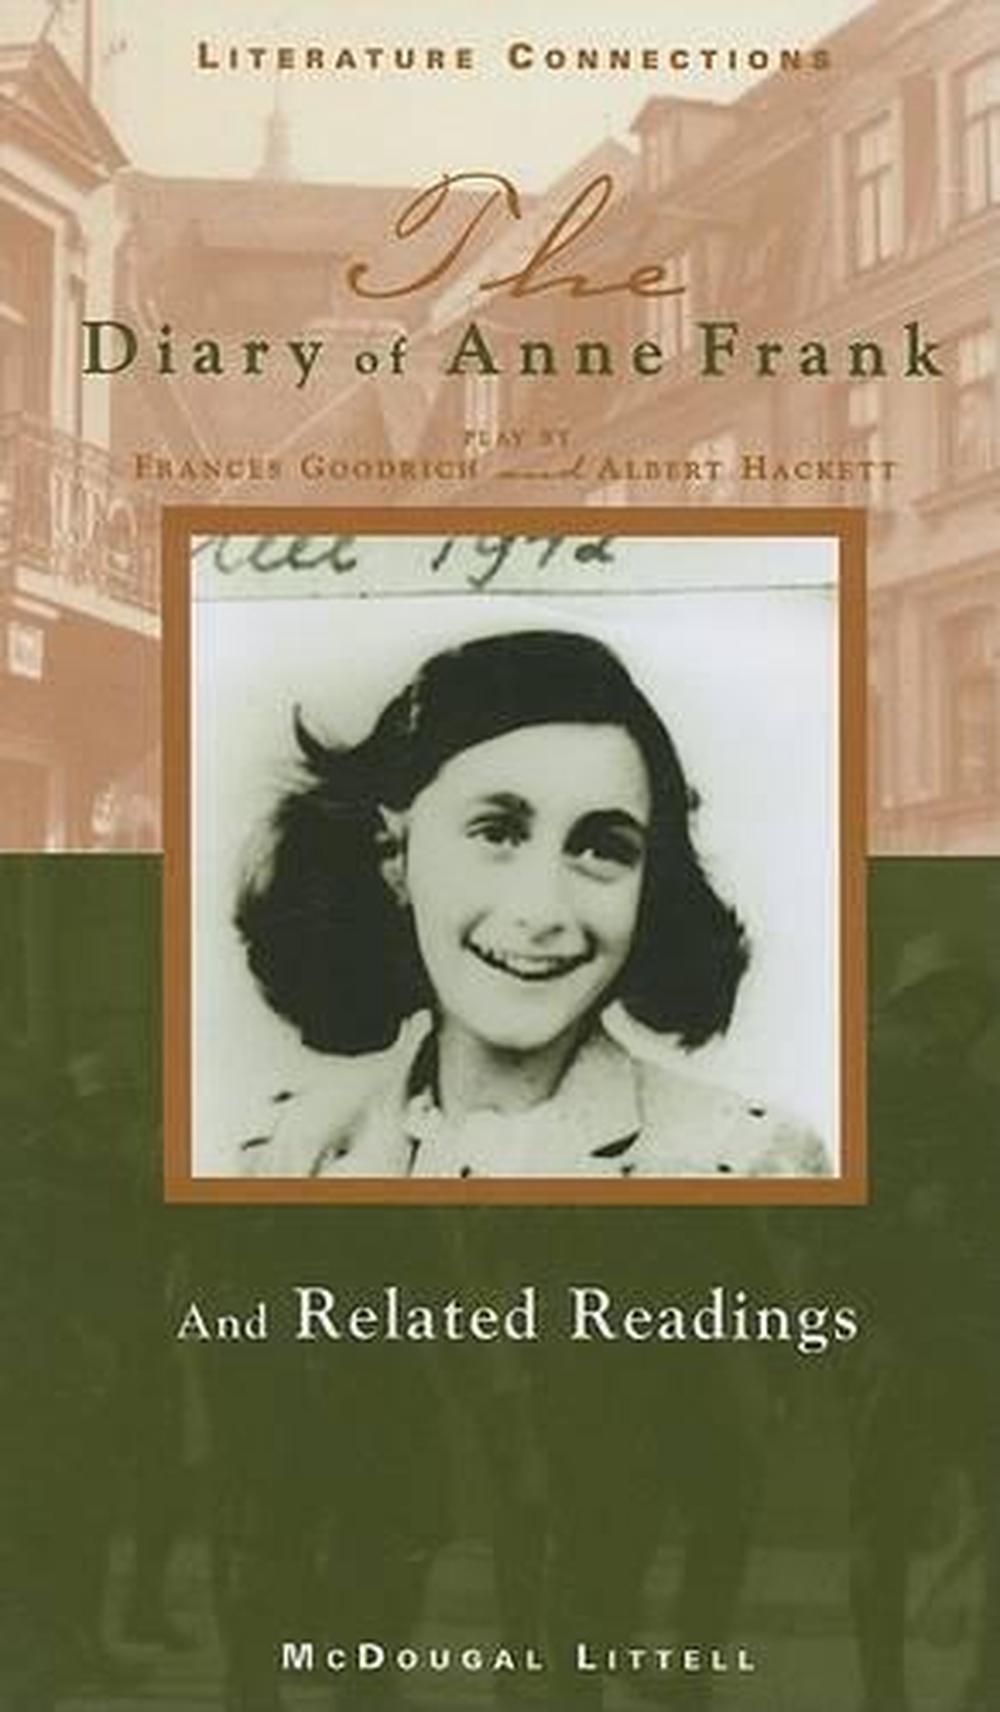 in the play diarie of anne frank